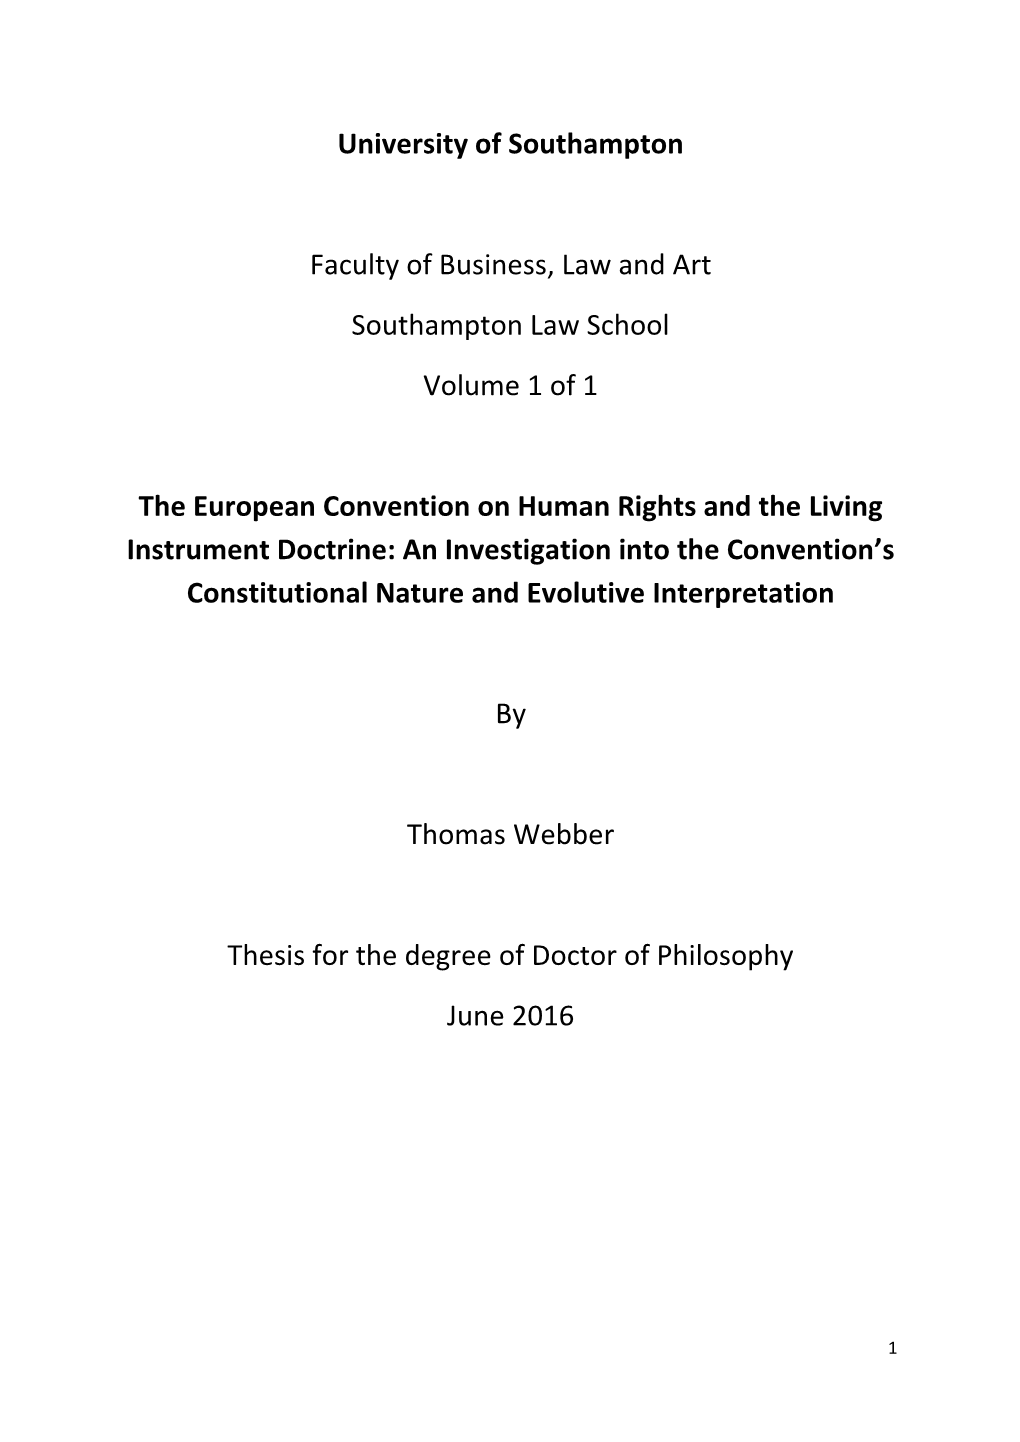 University of Southampton Faculty of Business, Law and Art Southampton Law School Volume 1 of 1 the European Convention on Human